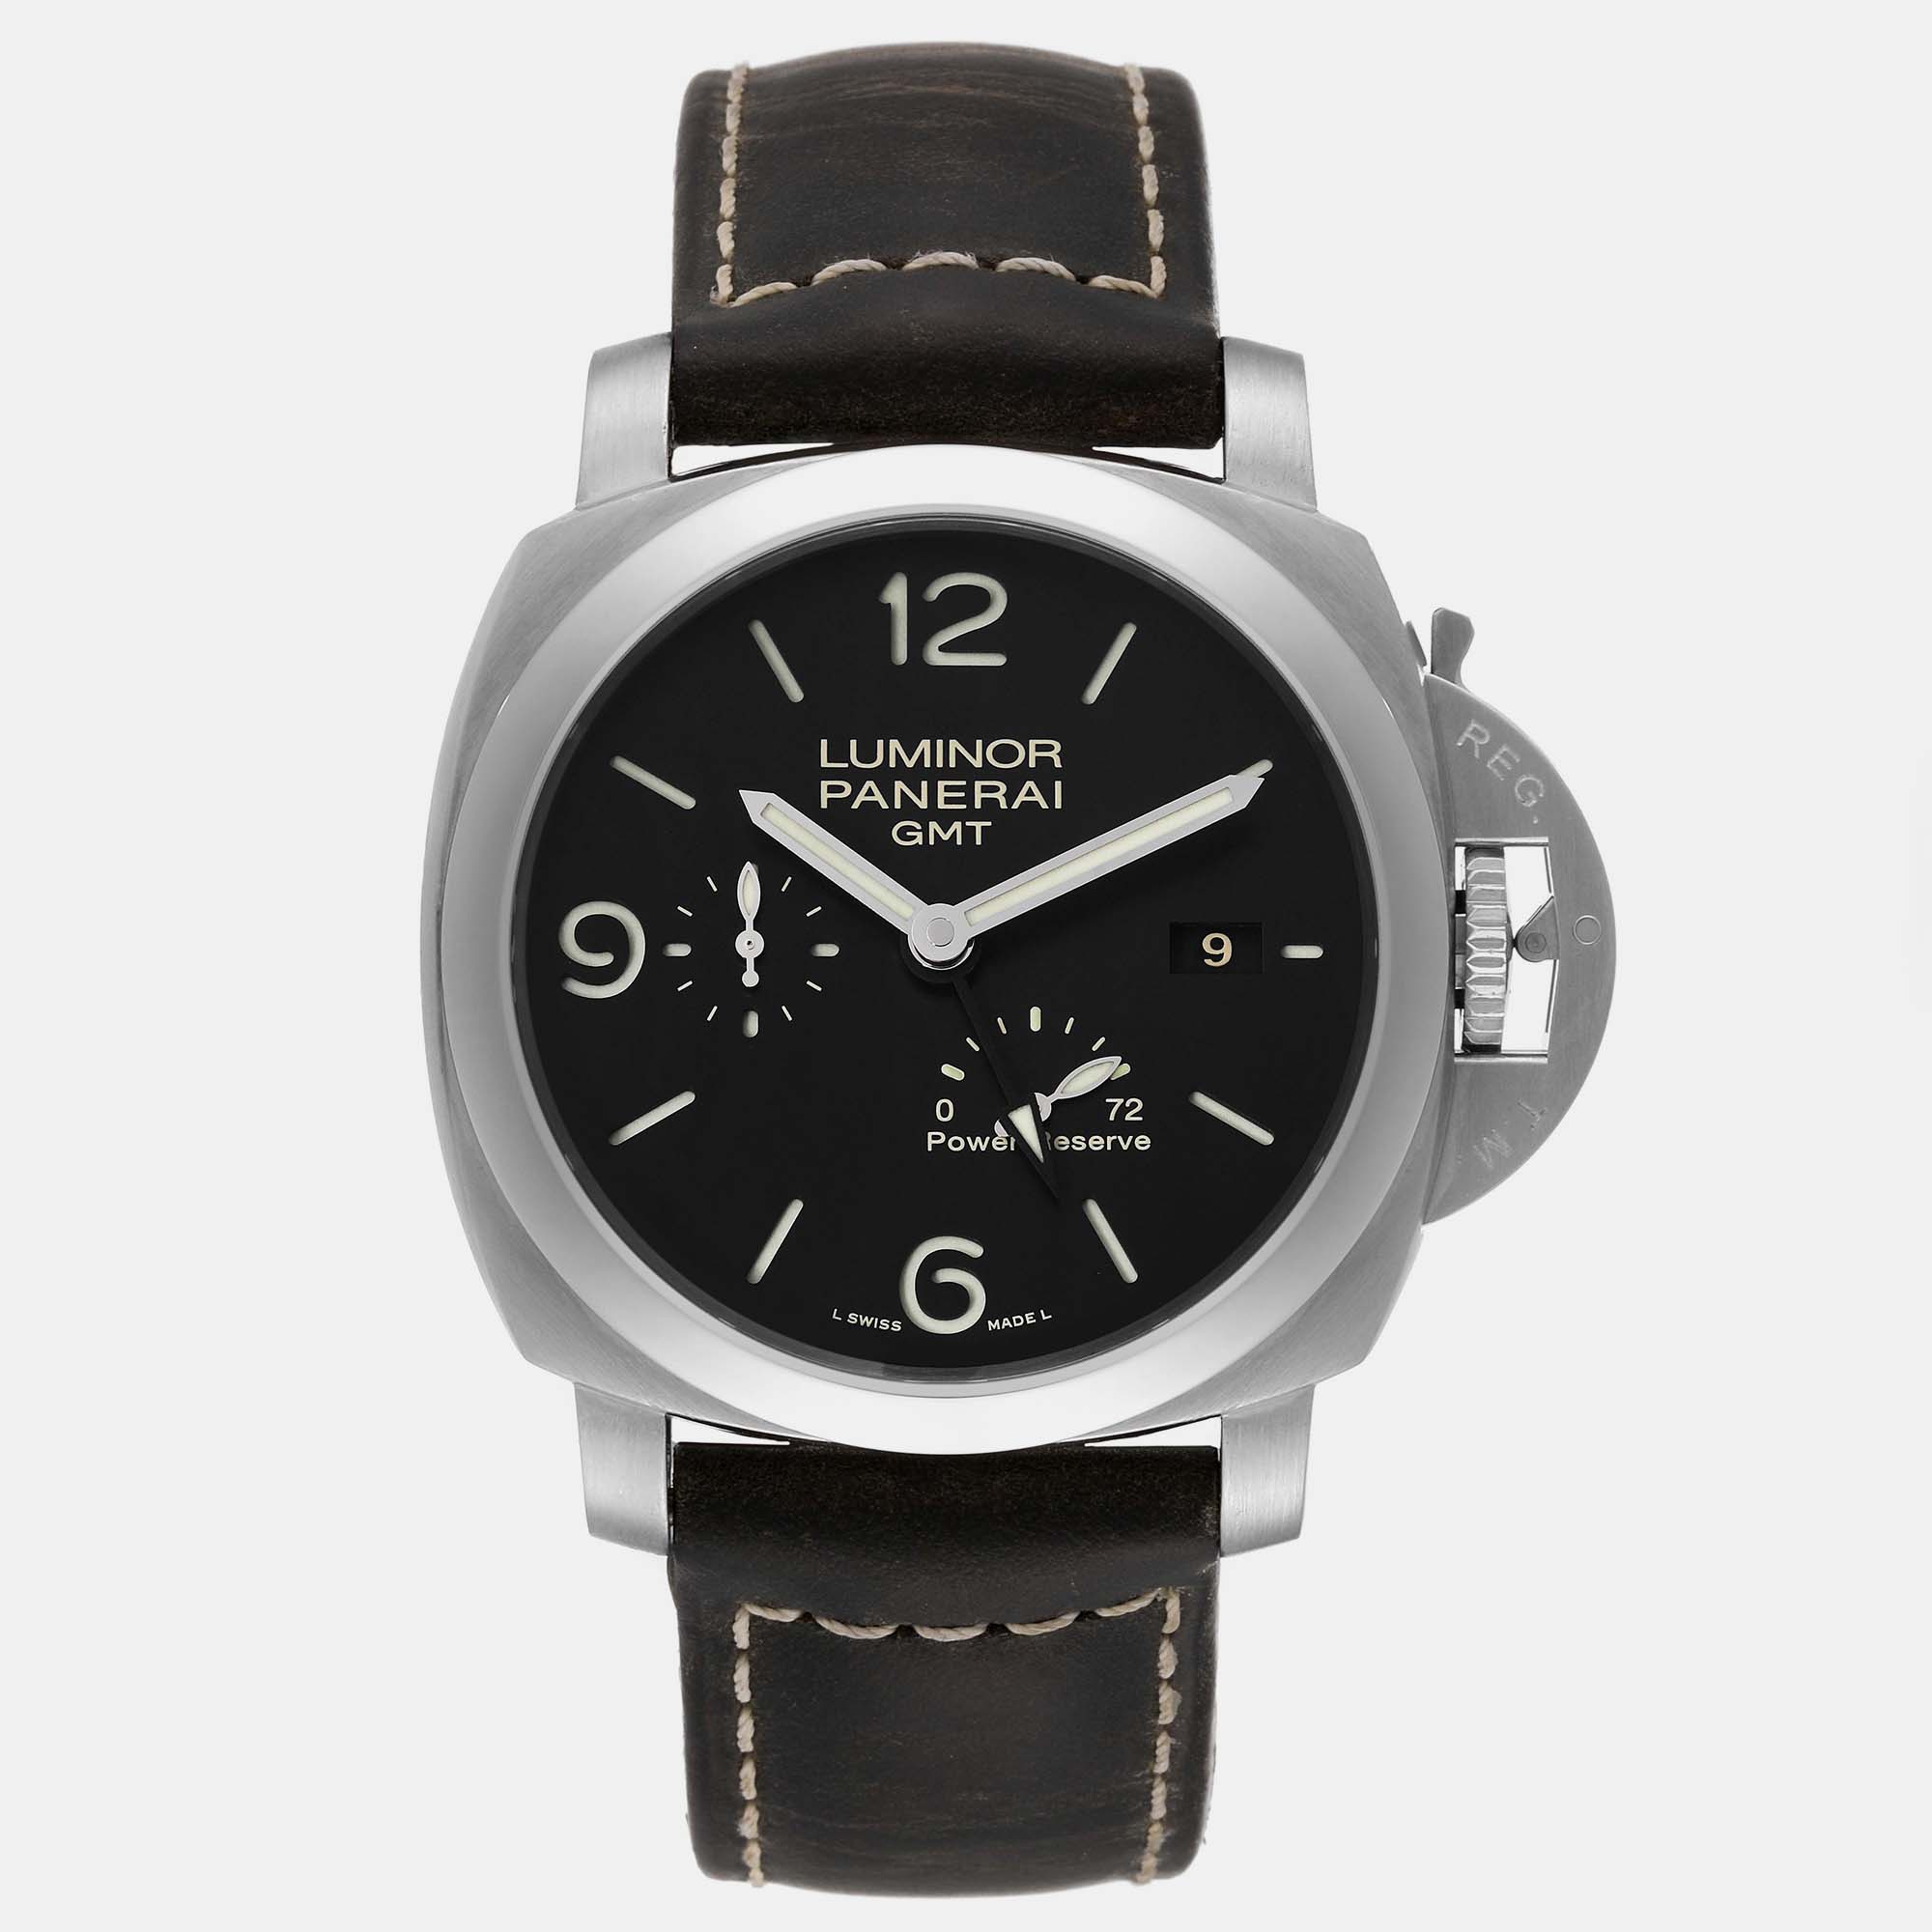 The charm of a finely crafted wristwatch accompanies the wearer through the years and to any occasion they have a date for. It is this charm infused with timeless luxury that makes this Panerai wristwatch such an incredible pick.